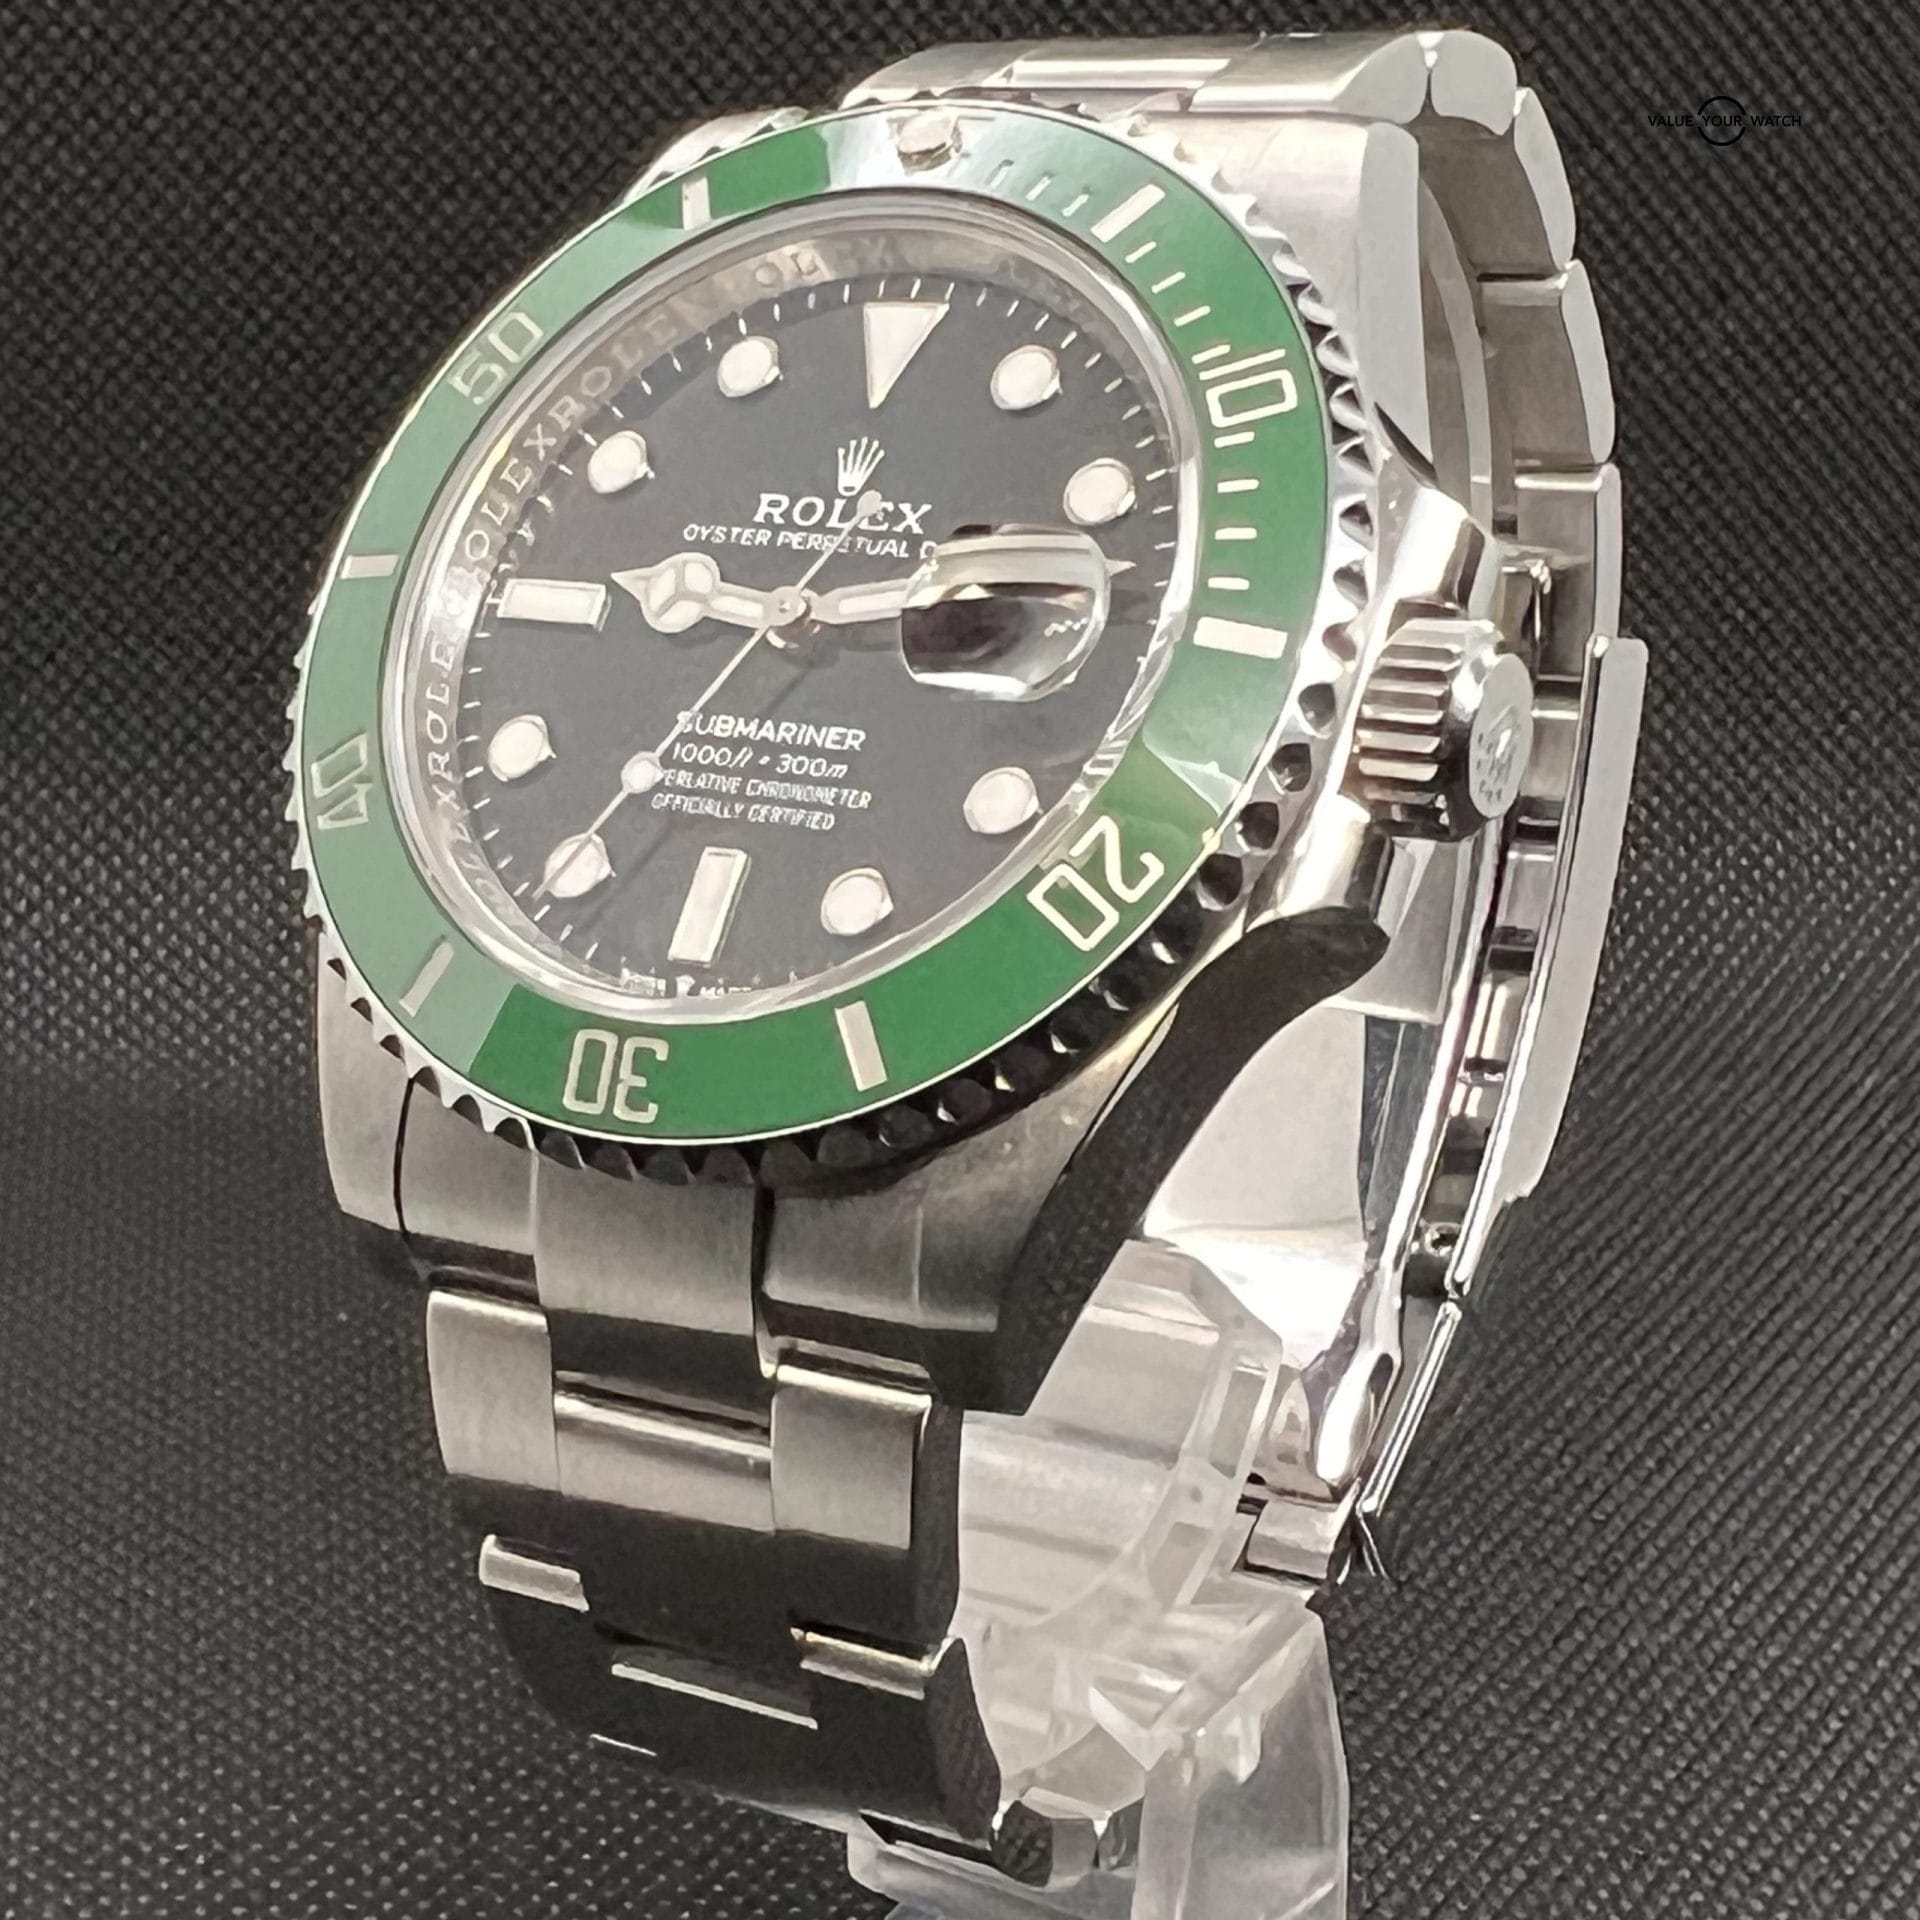 rolex oyster perpetual submariner green